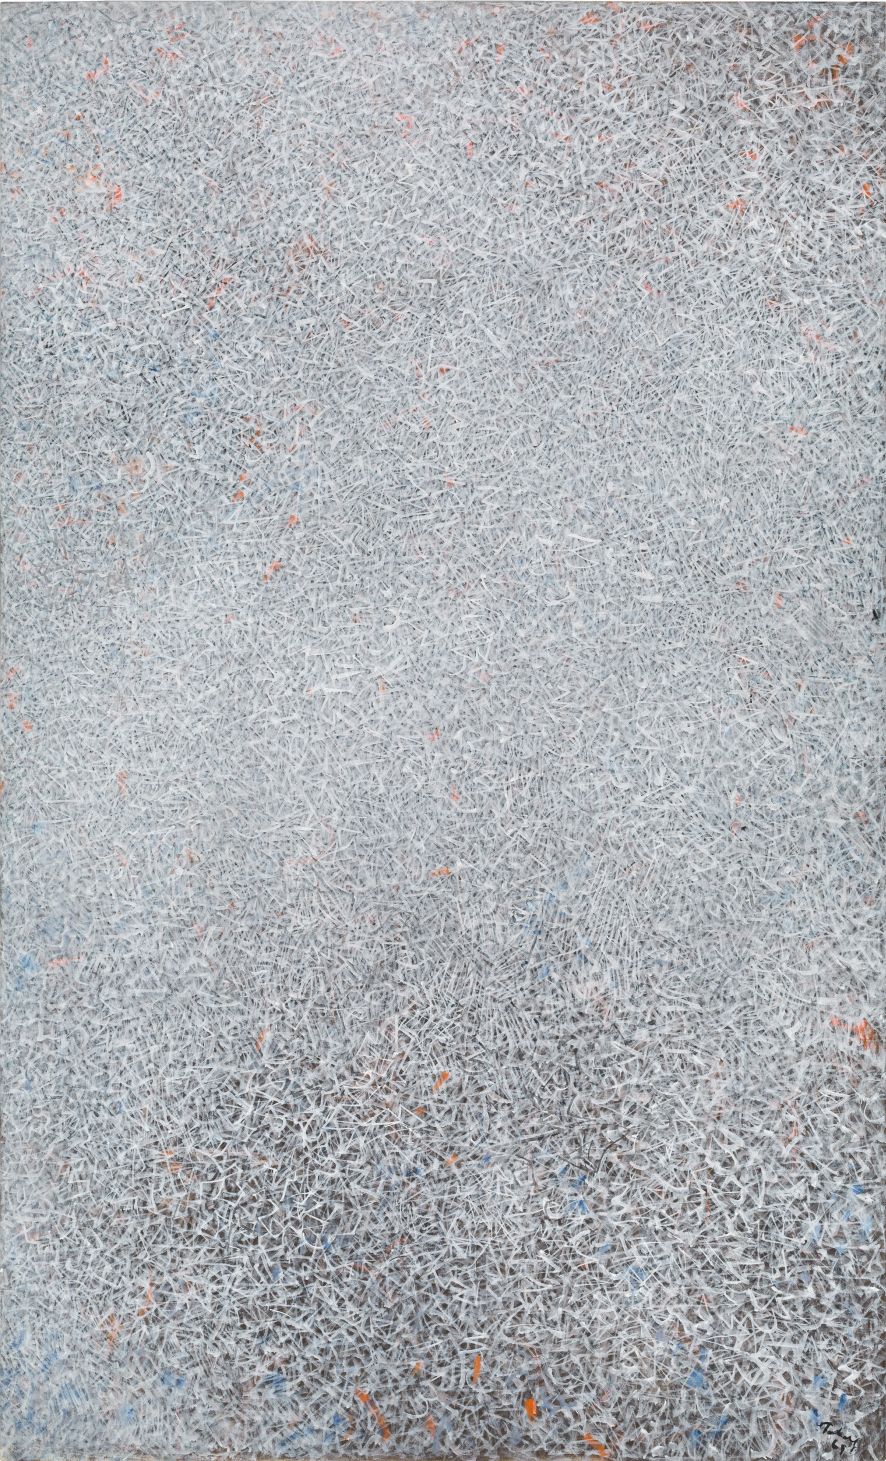 Mark Tobey, White World, 1969. Hirshhorn Museum and Sculpture Garden, Smithsonian Institution, Washington, DC. © 2017 Mark Tobey _ Seattle Art Museum, Artists Rights Society (ARS), New York